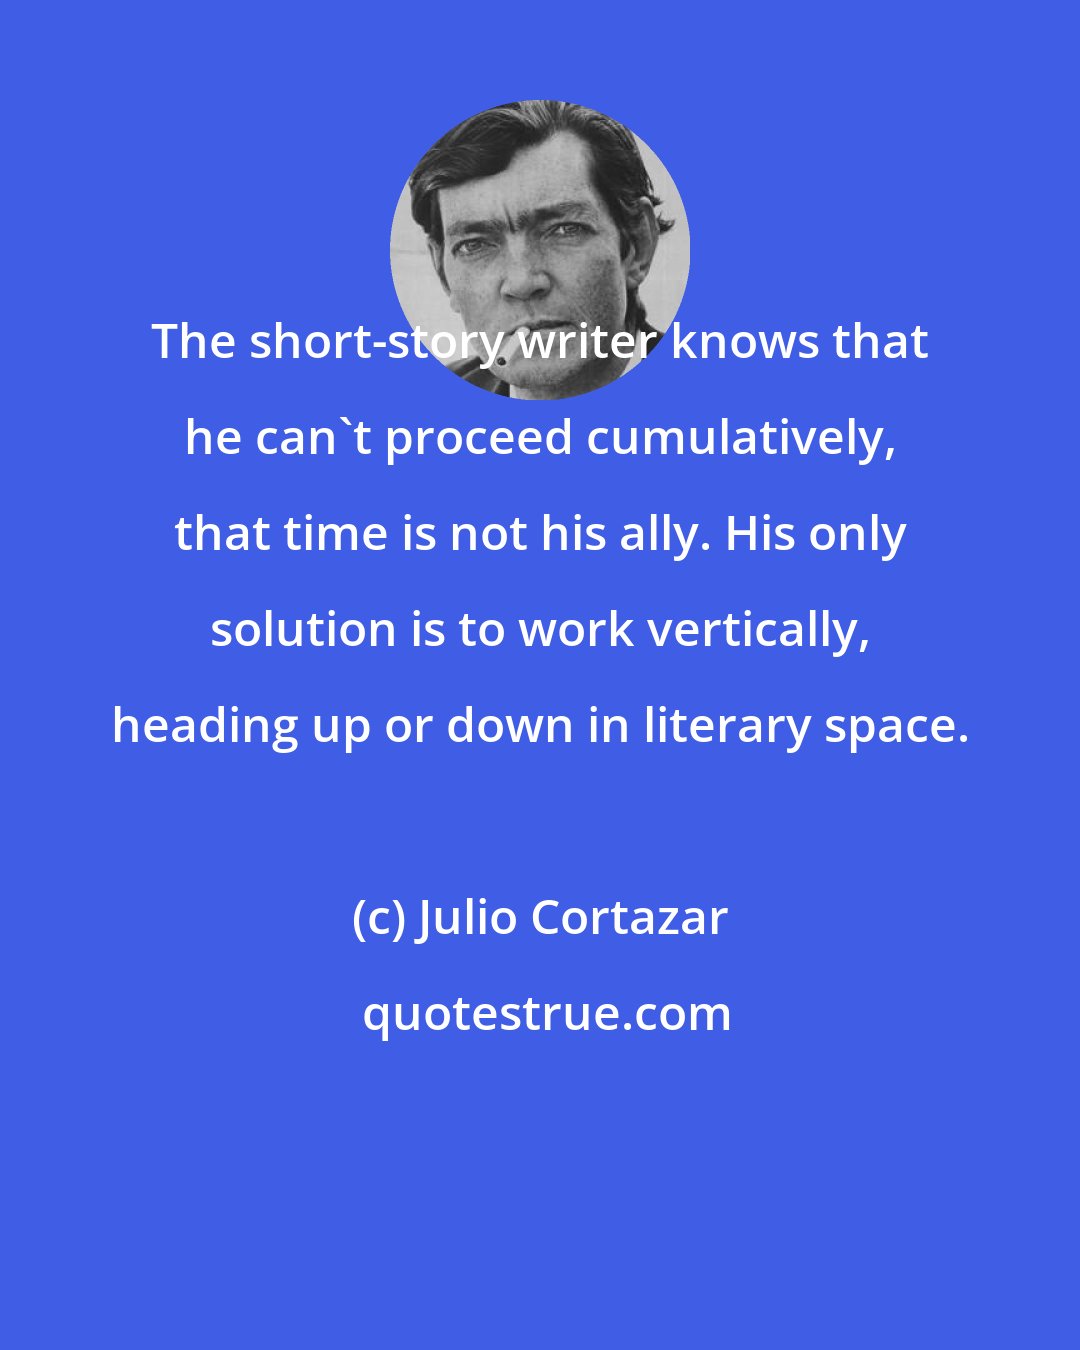 Julio Cortazar: The short-story writer knows that he can't proceed cumulatively, that time is not his ally. His only solution is to work vertically, heading up or down in literary space.